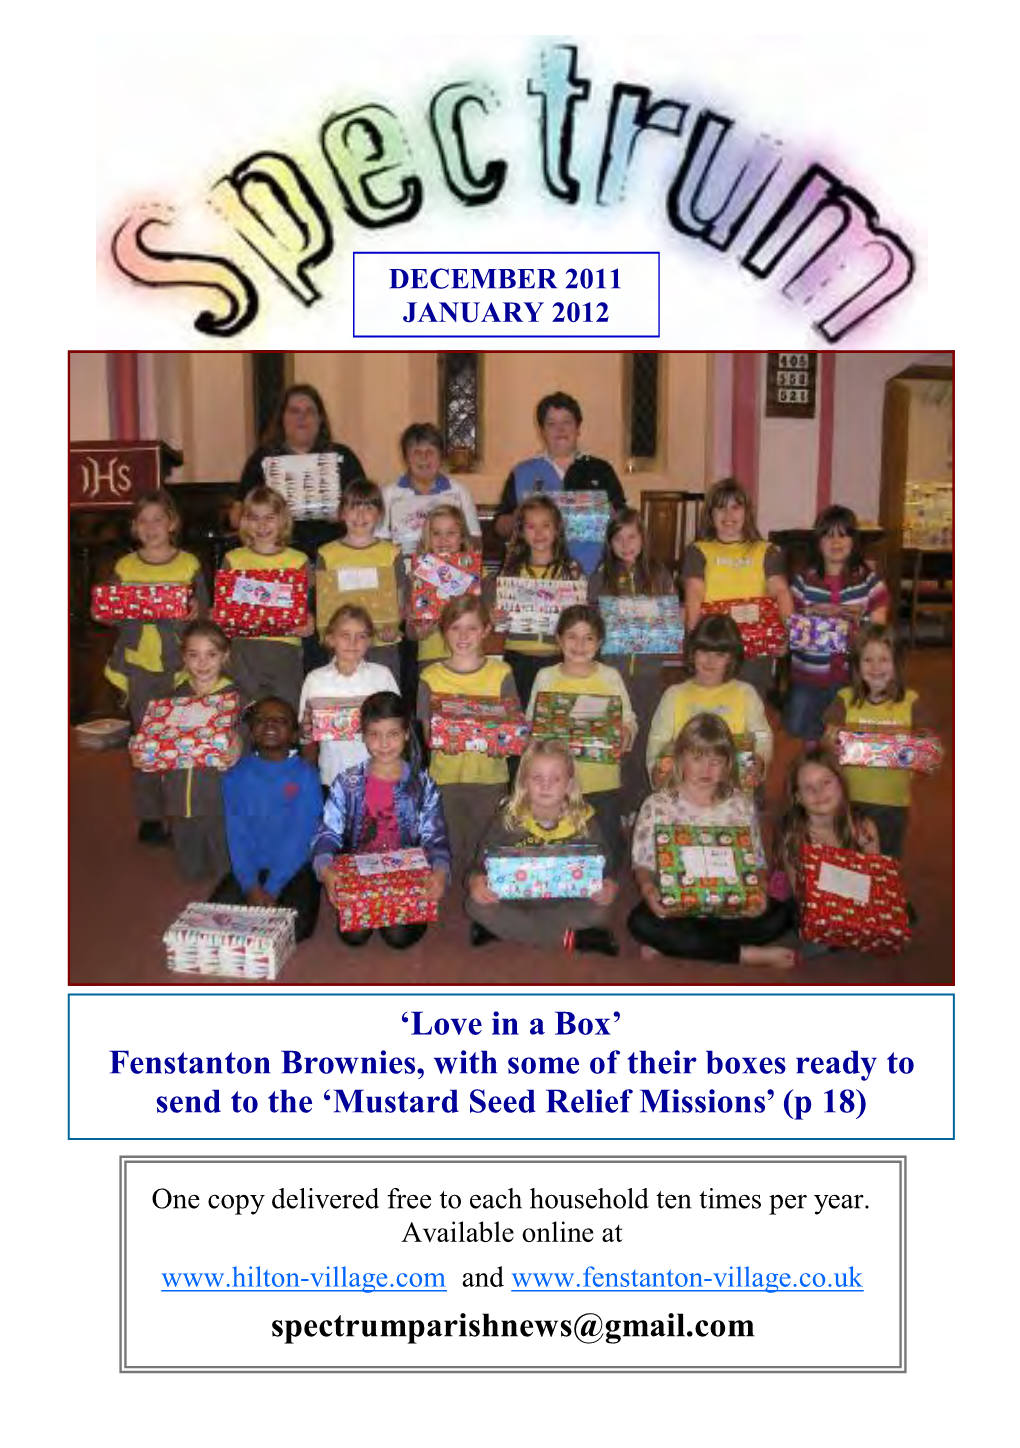 Fenstanton Brownies, with Some of Their Boxes Ready to Send to the ‘Mustard Seed Relief Missions’ (P 18)